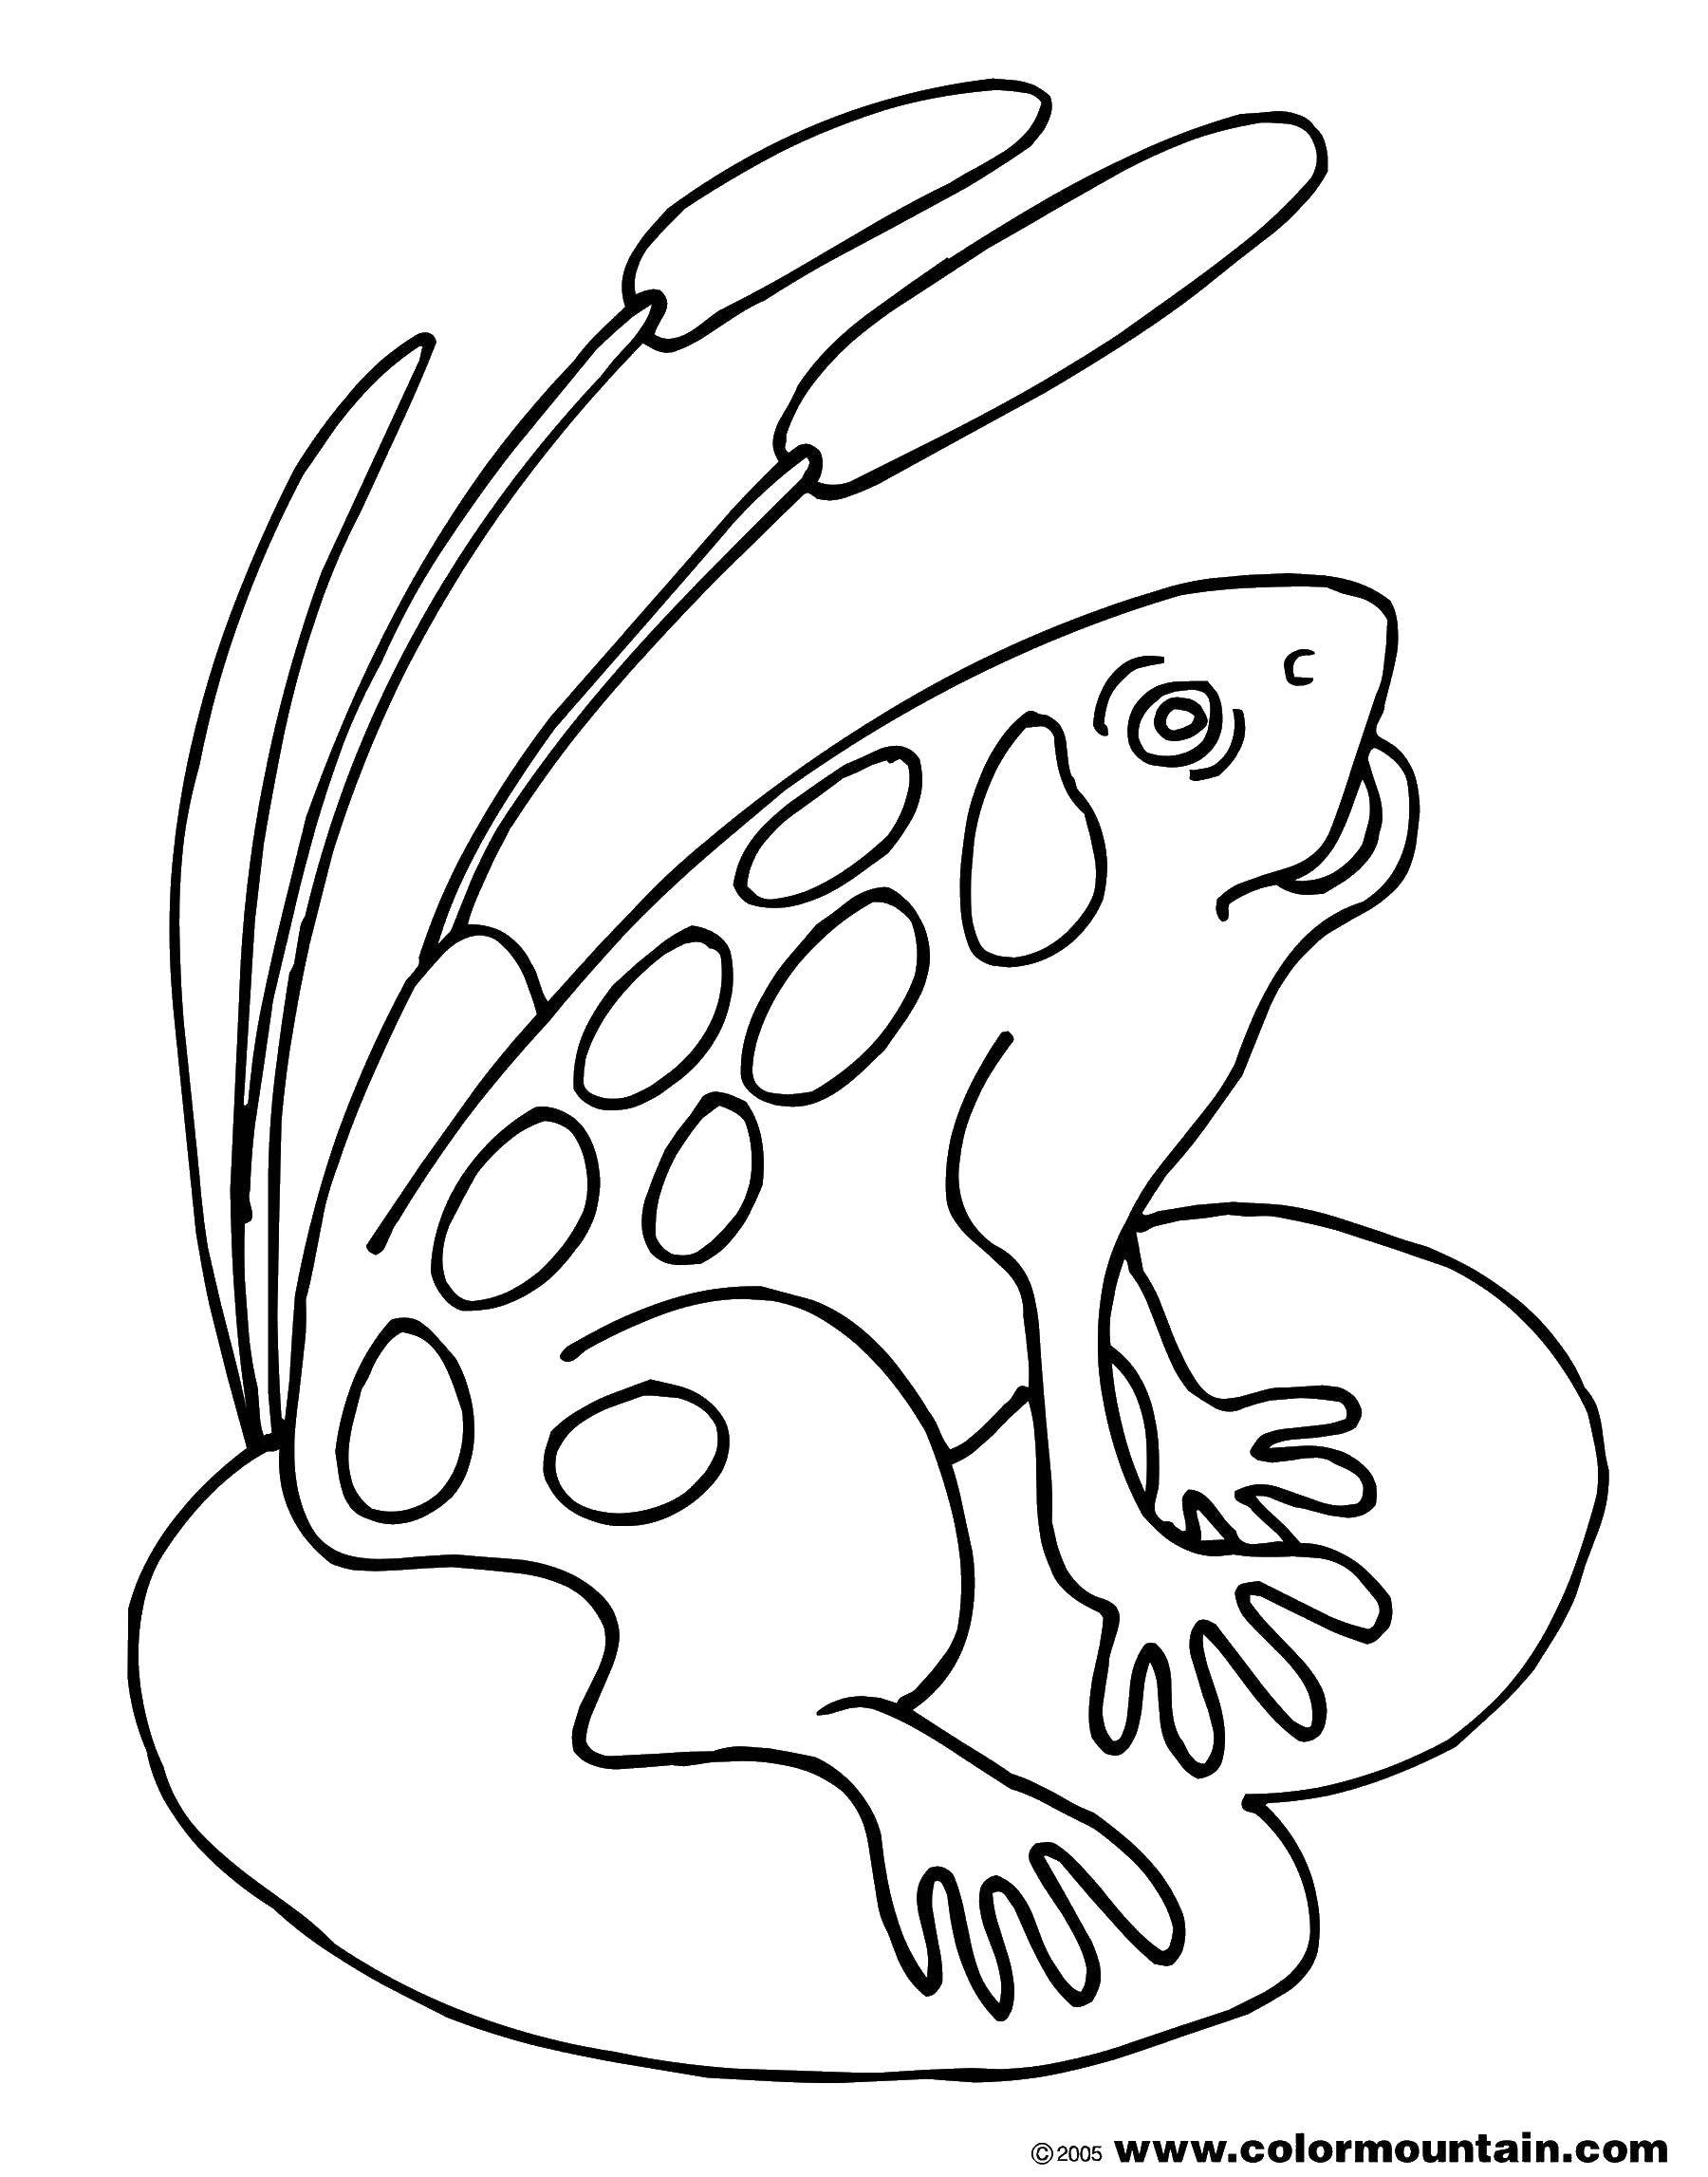 Coloring Frog. Category Animals. Tags:  animals, frog.